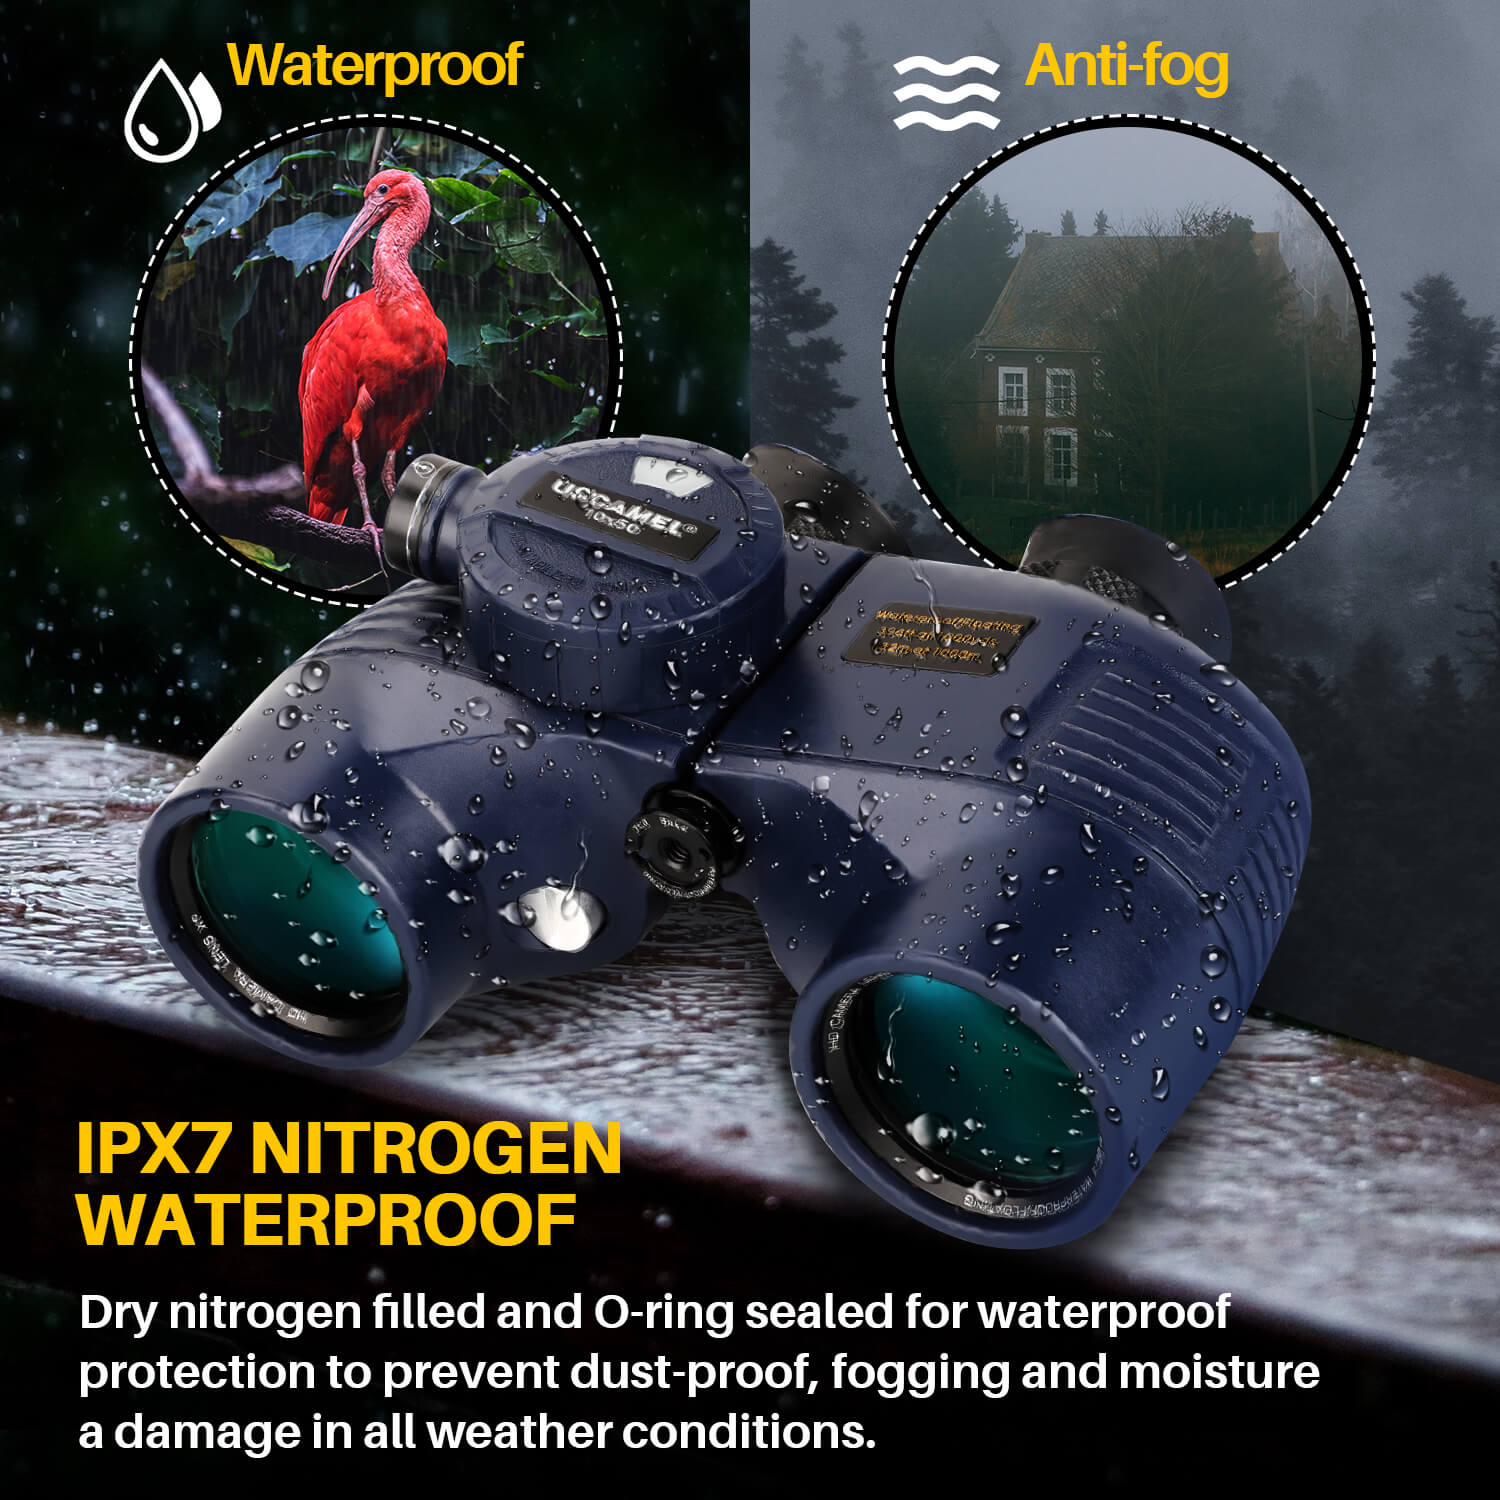 IPX7 waterproof with nitrogen filled and o-ring sealed